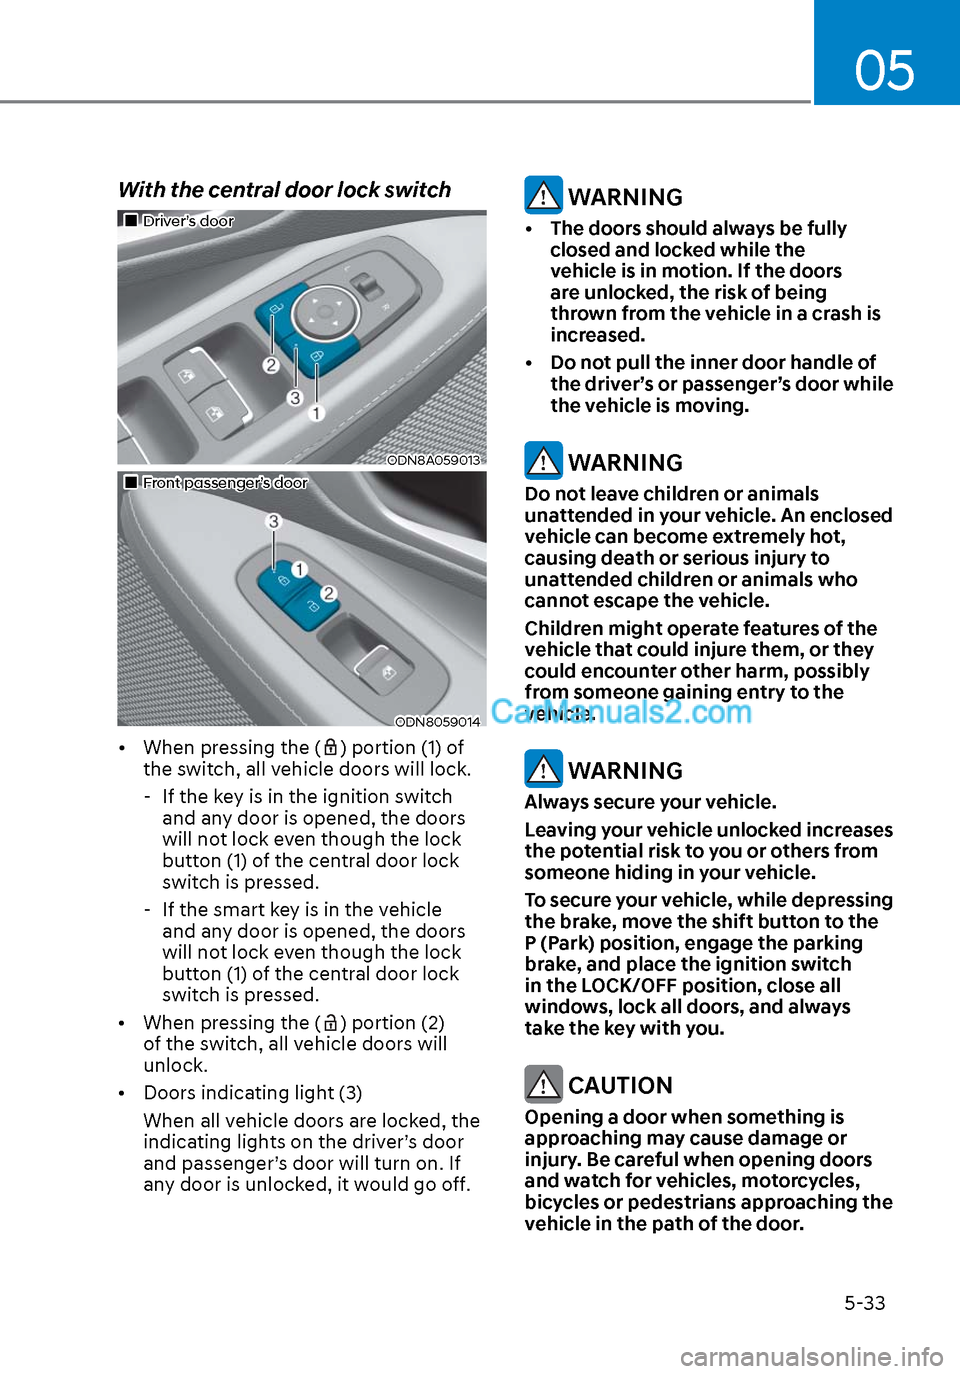 Hyundai Sonata 2020  Owners Manual 05
5-33
With the central door lock switch
Driver’s doorDriver’s door
ODN8A059013ODN8A059013
Front passenger’s doorFront passenger’s door
ODN8059014ODN8059014
•  When 